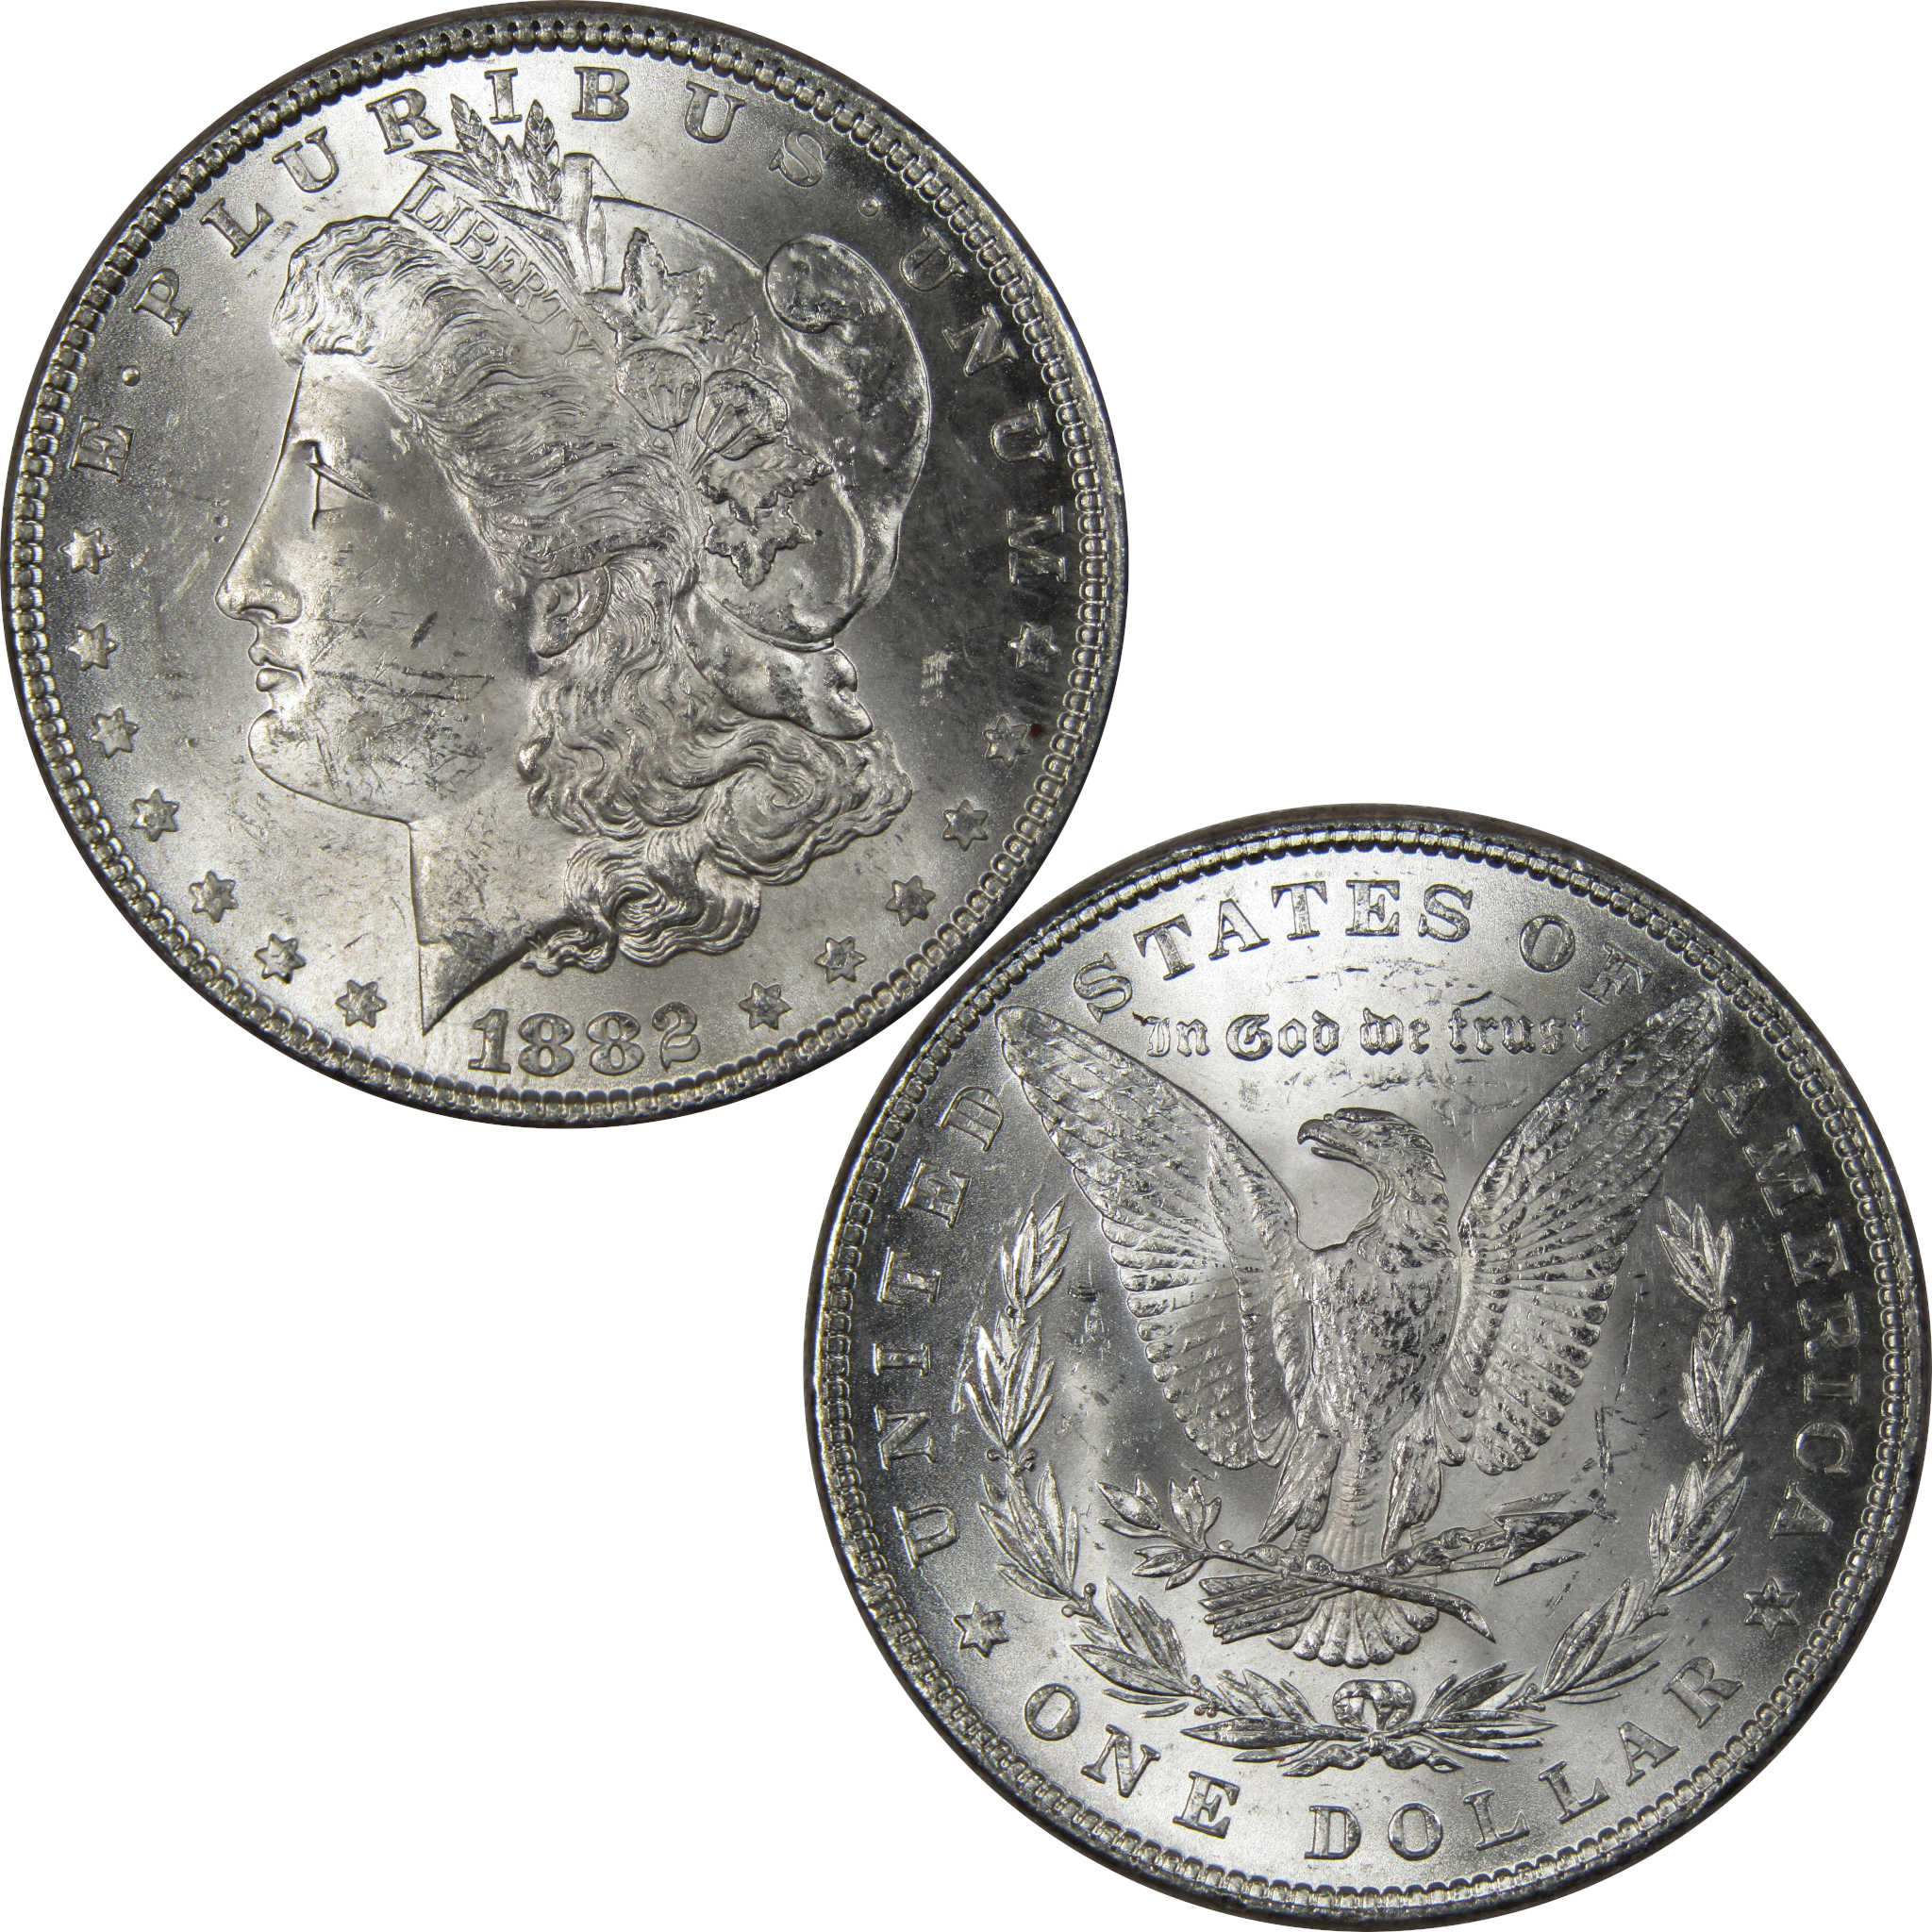 1882 Morgan Dollar BU Uncirculated Mint State 90% Silver SKU:IPC9648 - Morgan coin - Morgan silver dollar - Morgan silver dollar for sale - Profile Coins &amp; Collectibles